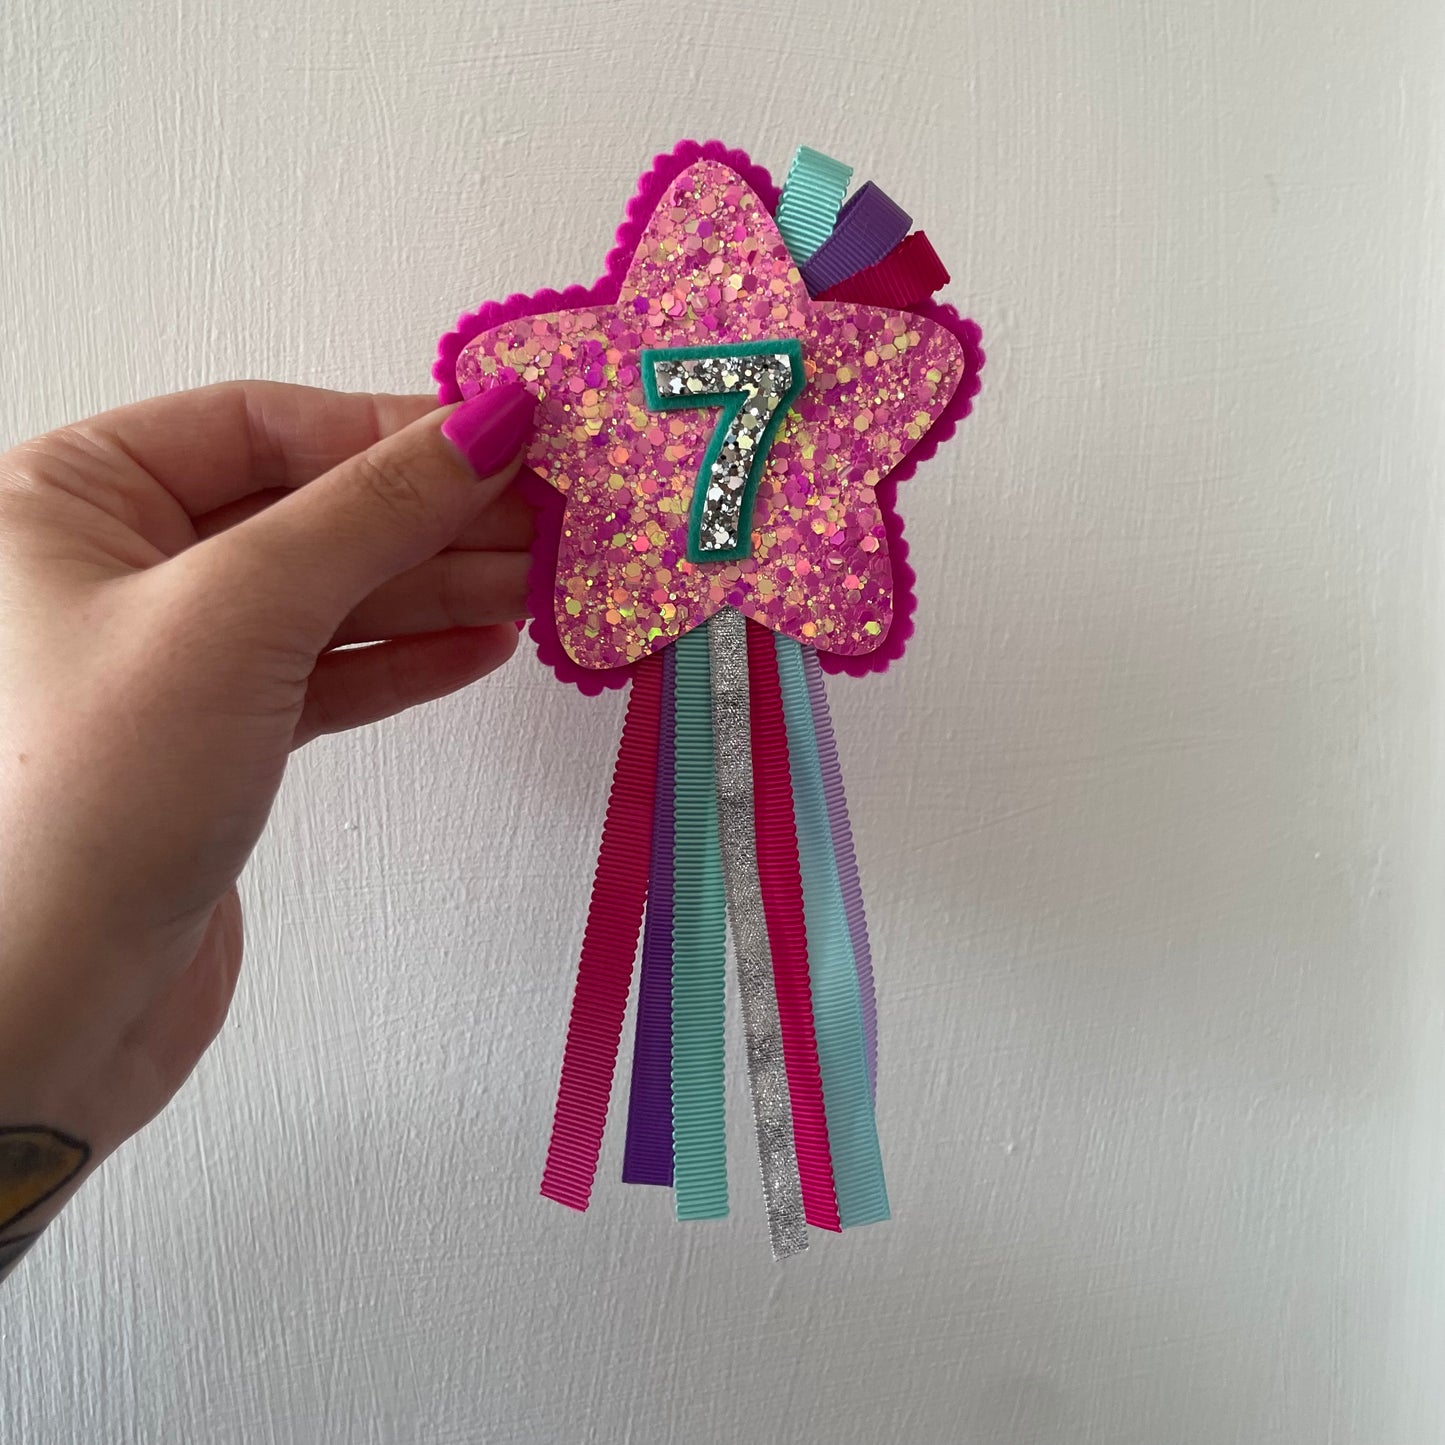 Scalloped Star Birthday badge with ribbons